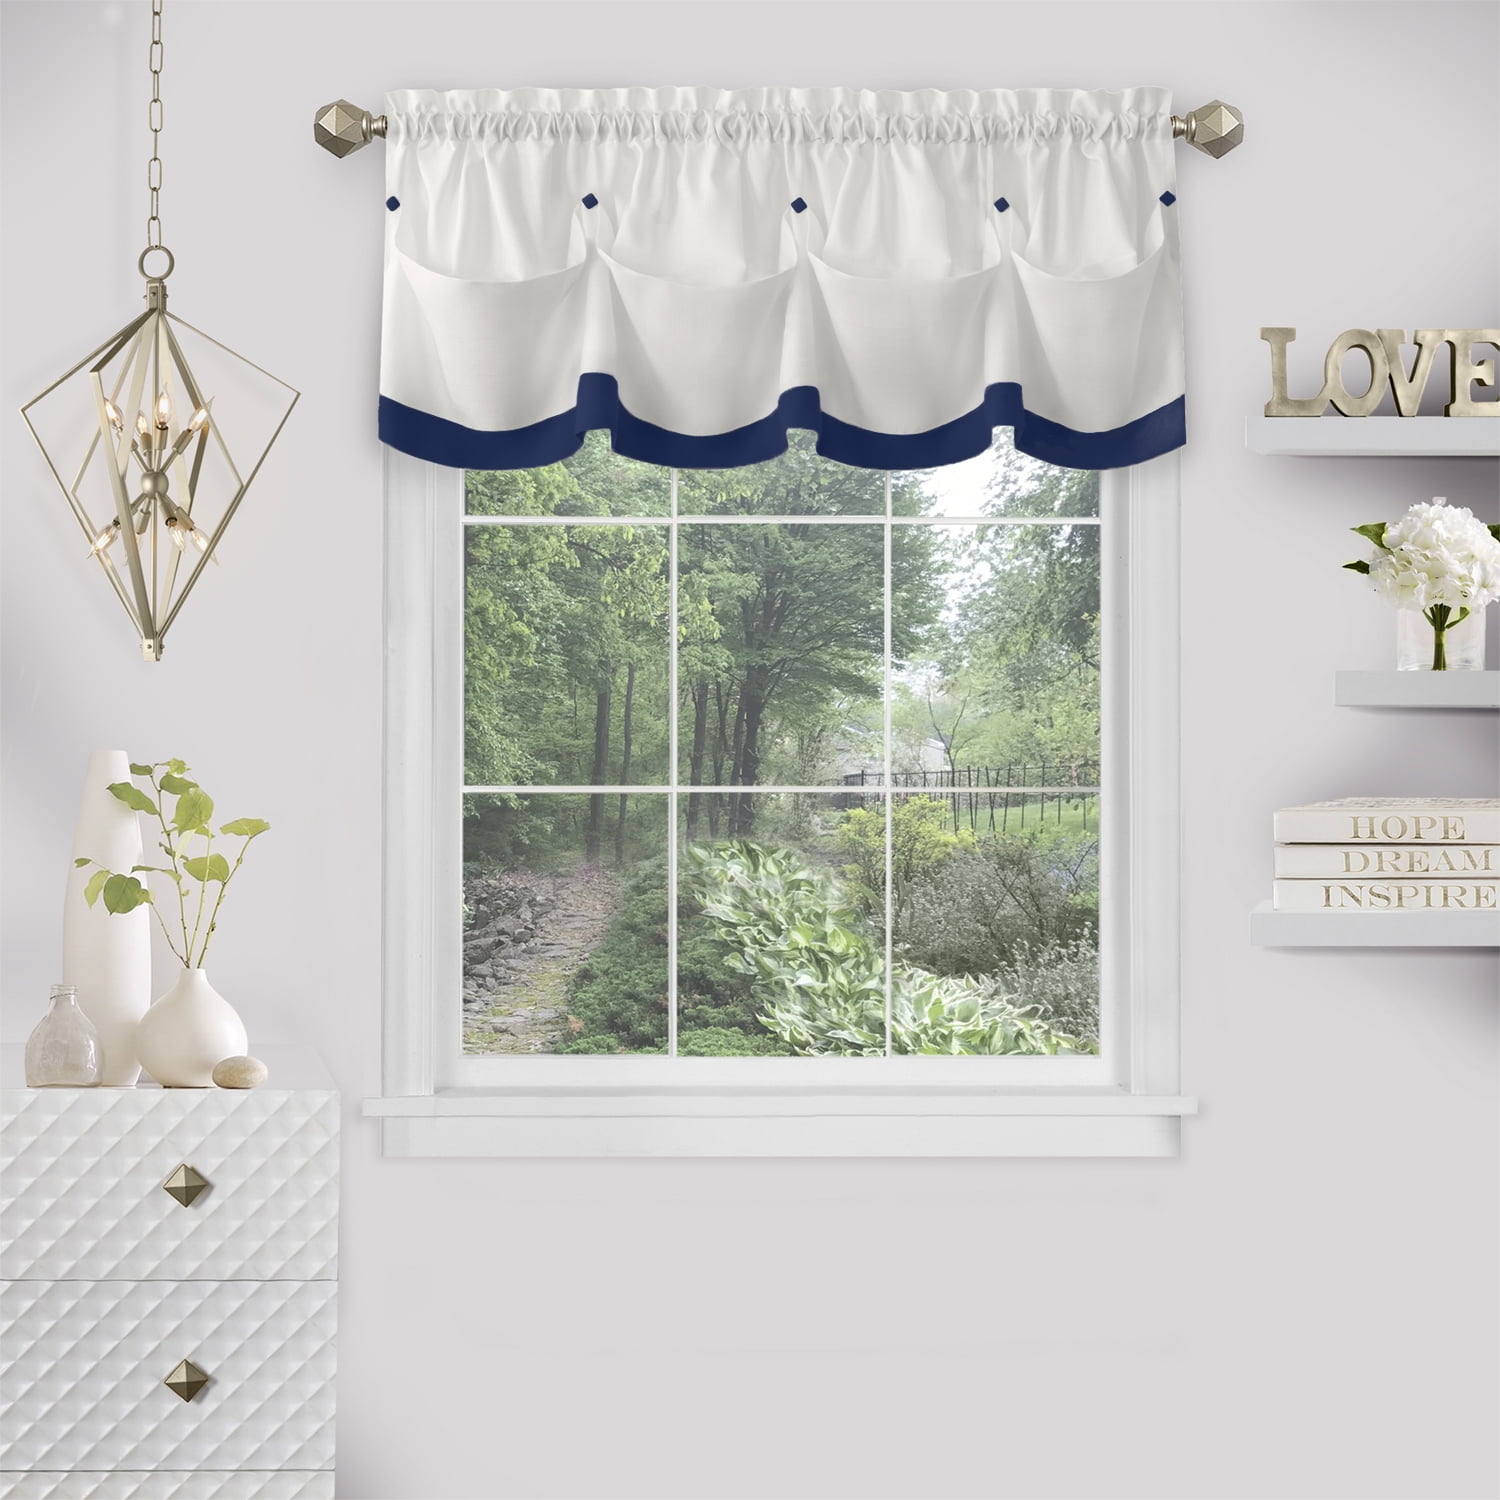 Picture of Achim LAVL14NY12 58 x 14 in. Lana Window Curtain Valance, Navy